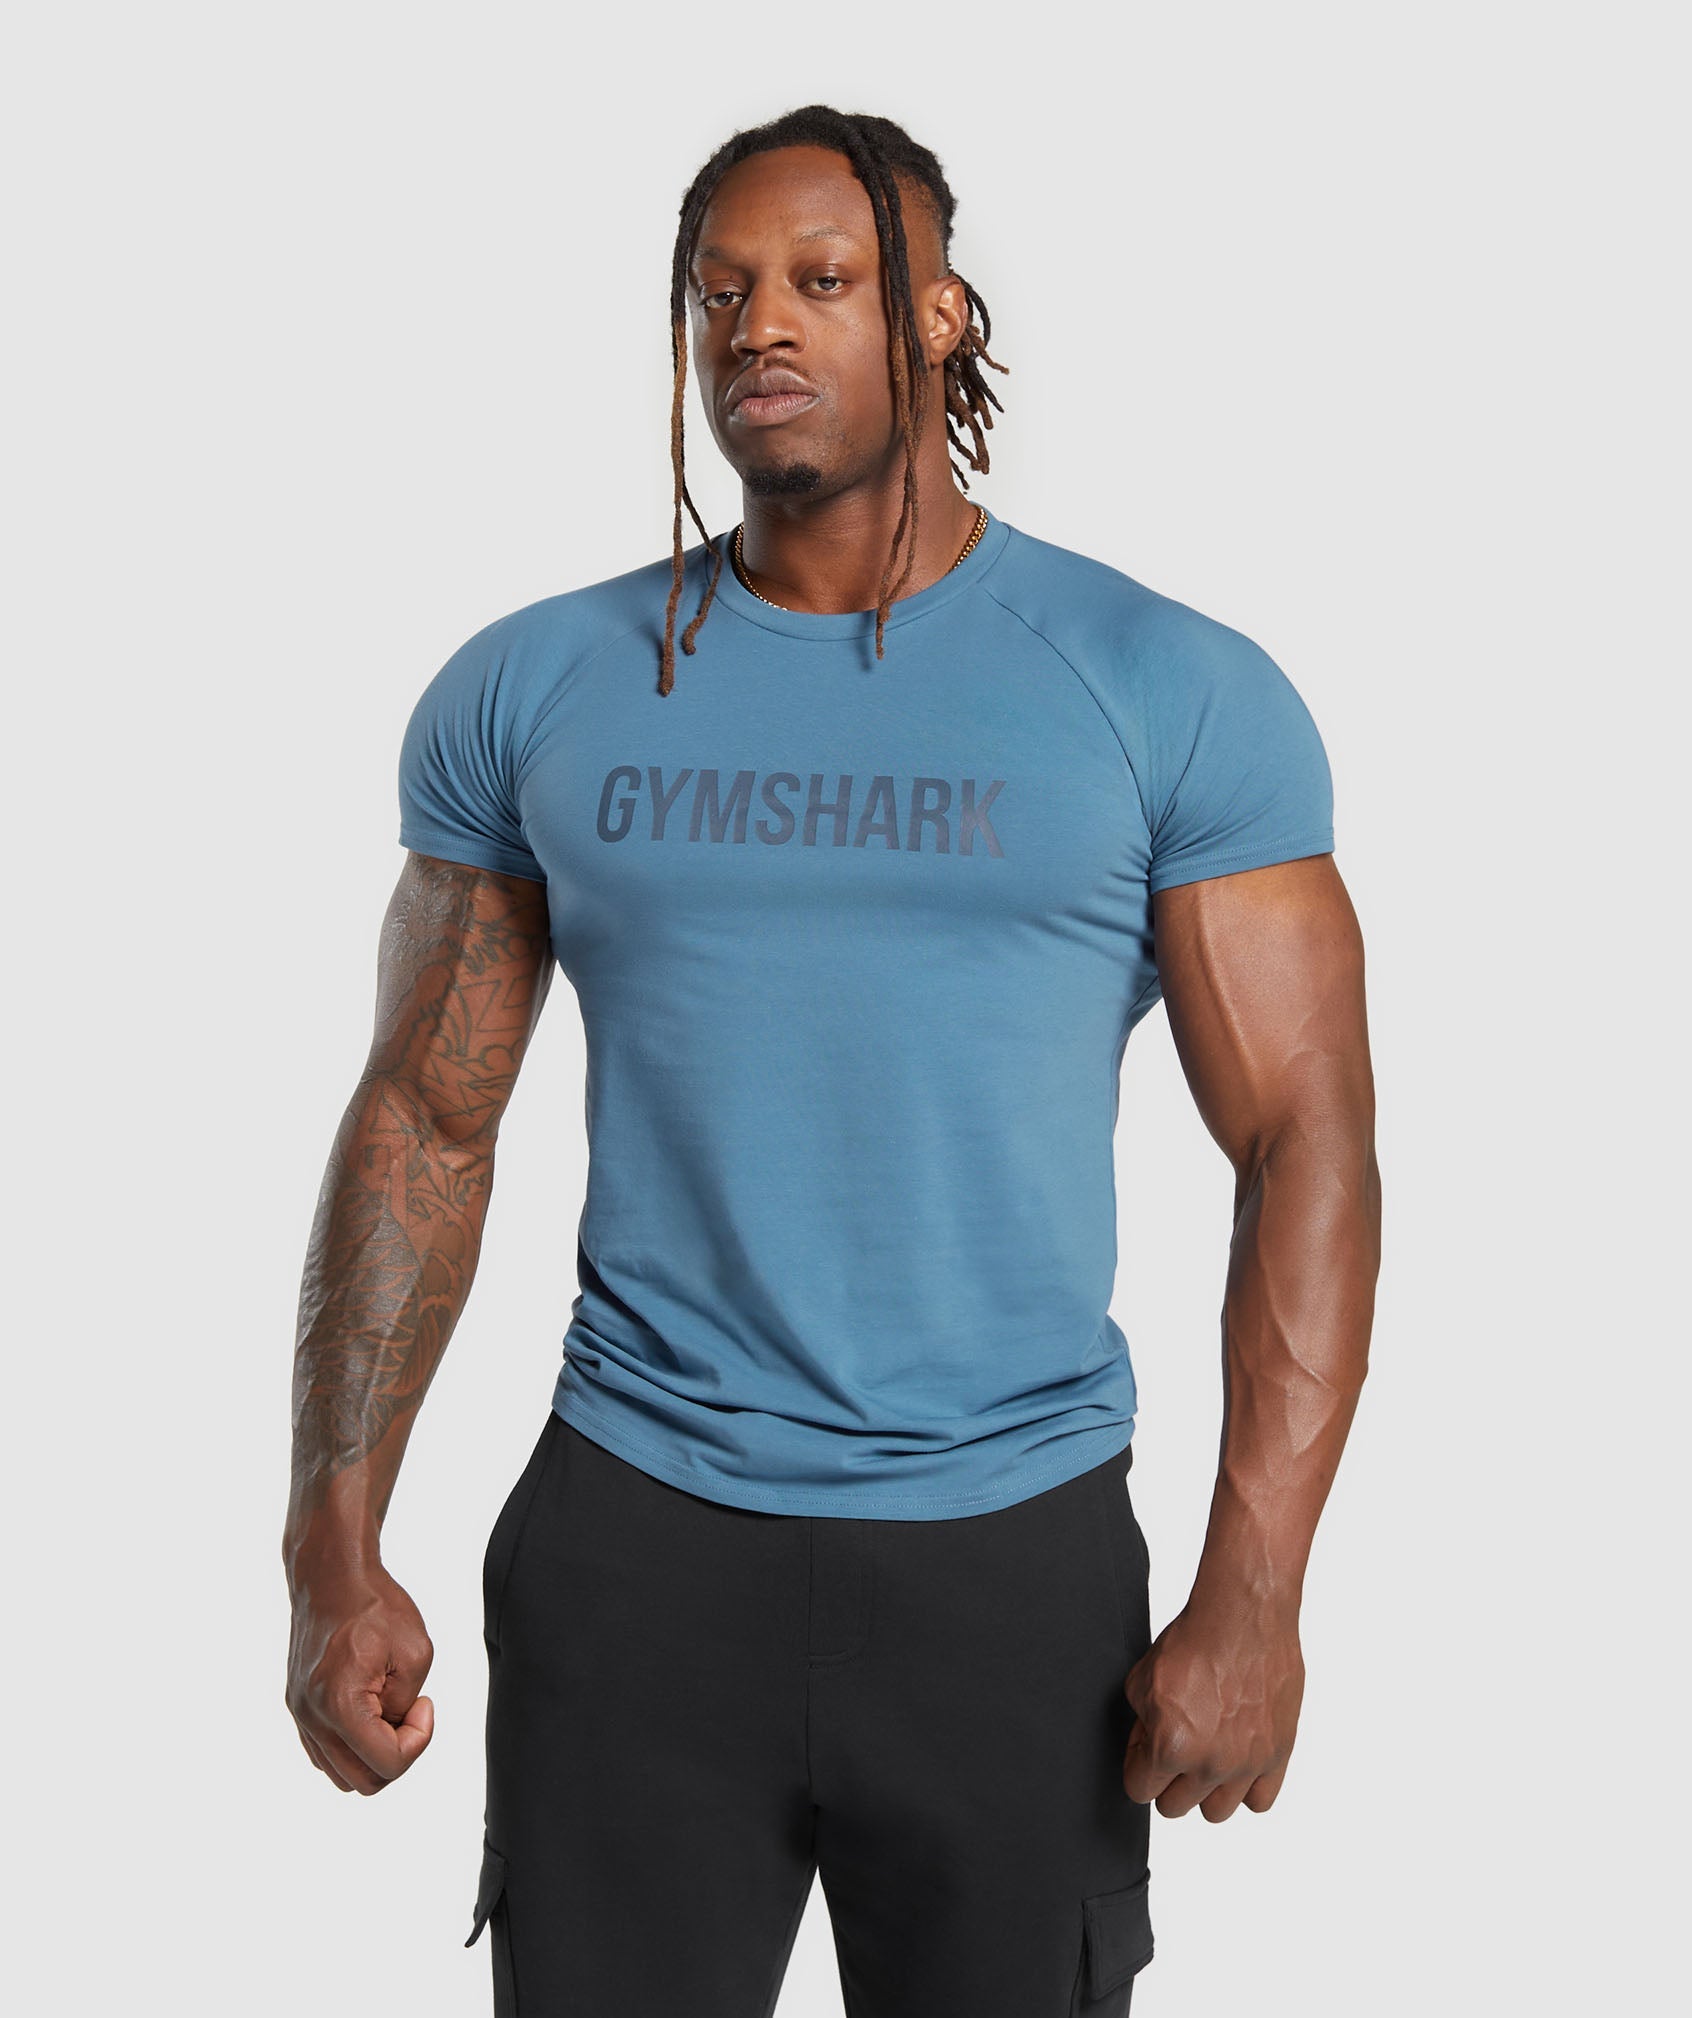 Gymshark Official Store - Women's Gym Clothes & Workout Clothes